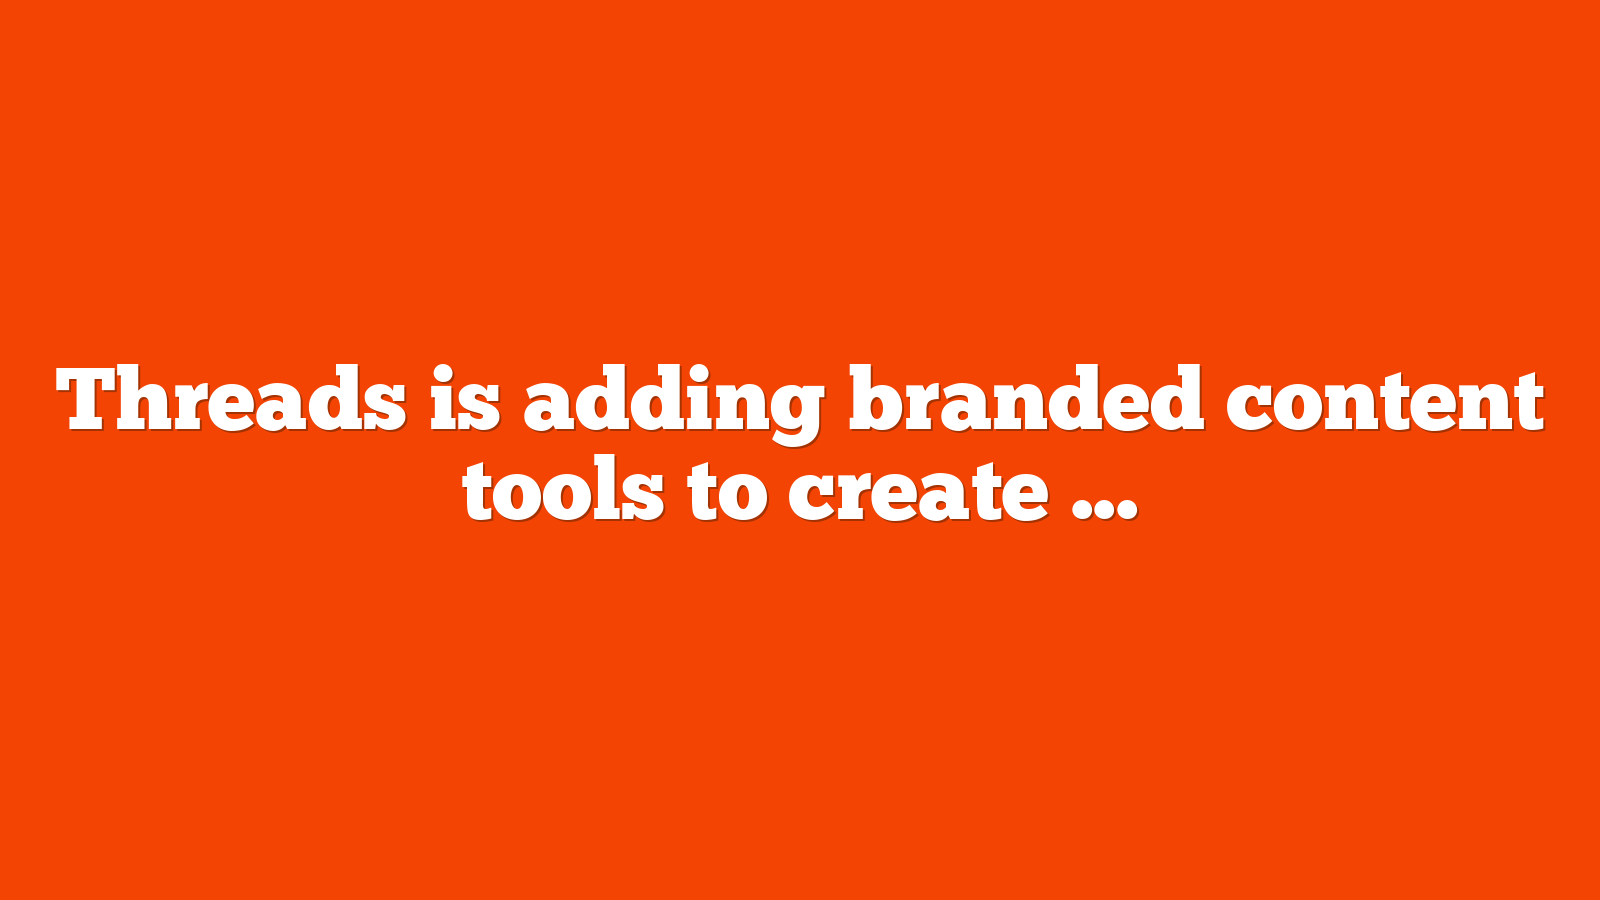 Threads is adding branded content tools to create paid promotion opportunities